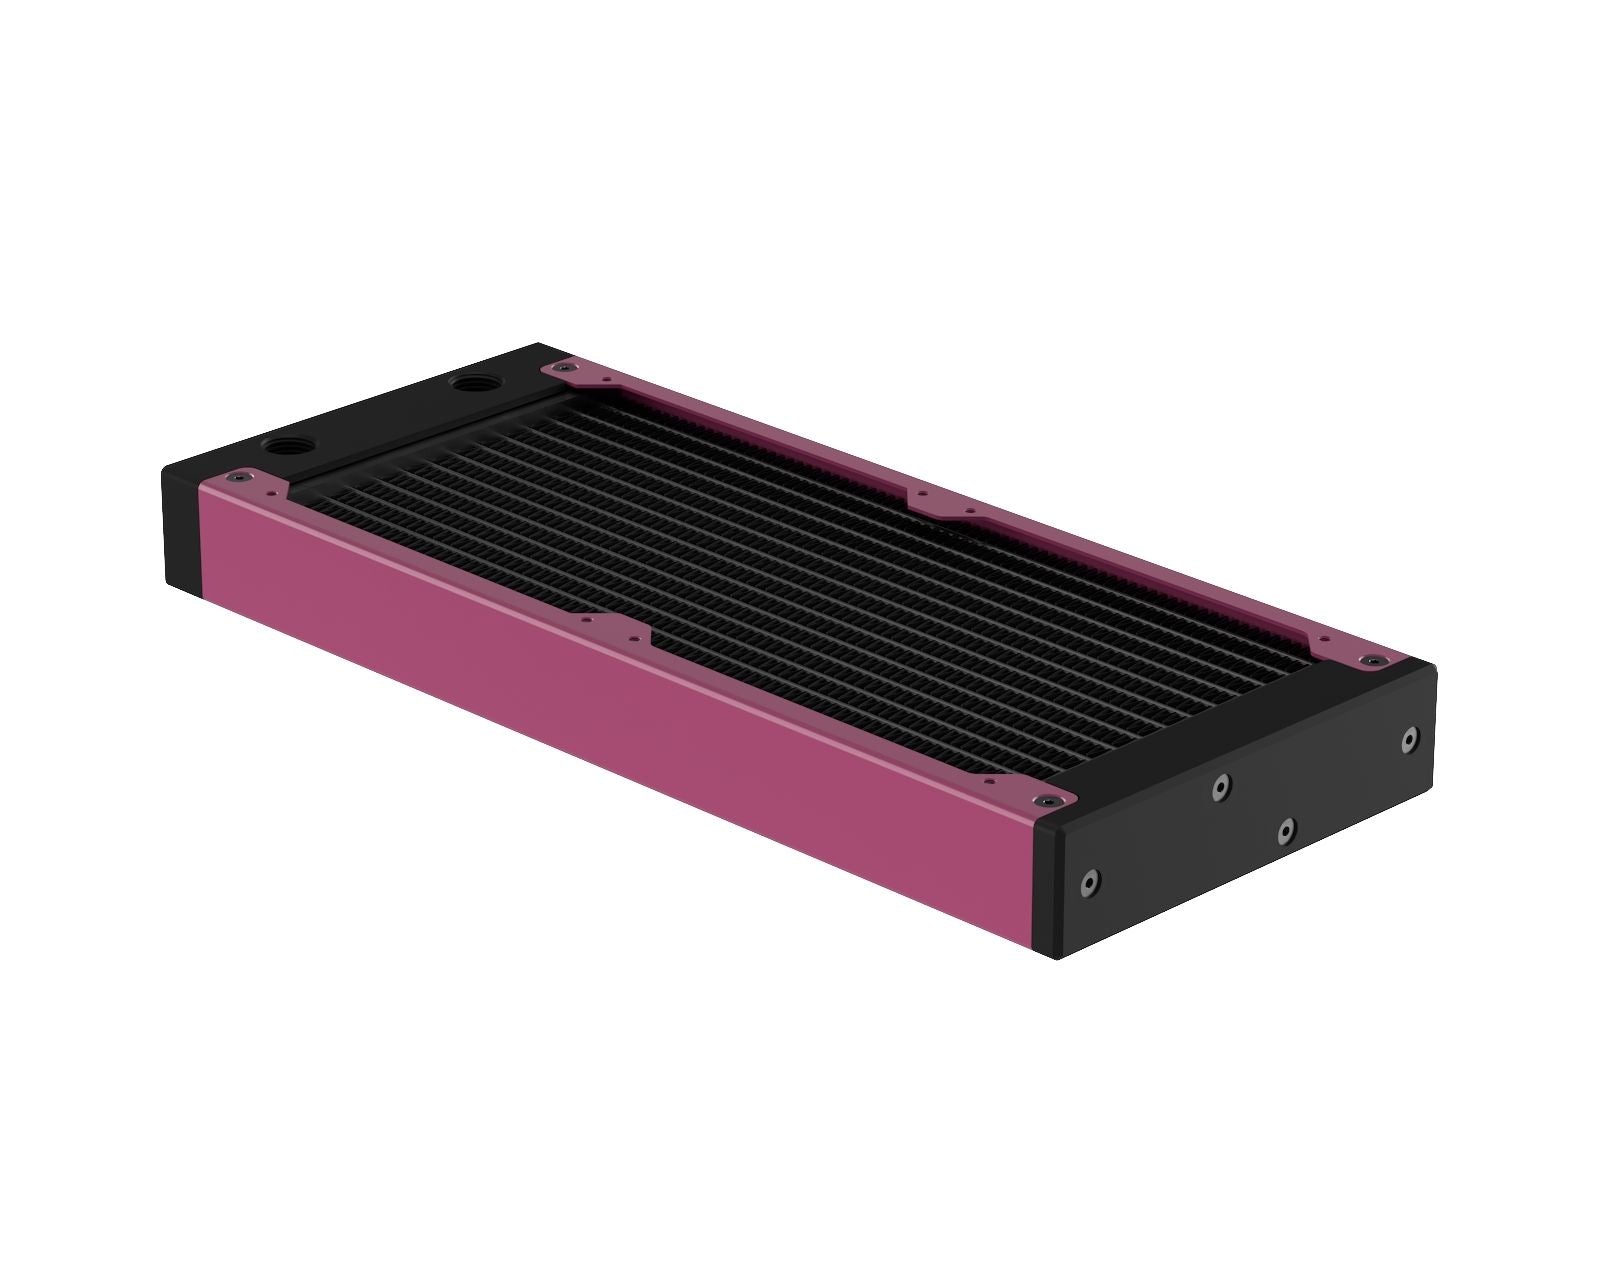 PrimoChill 240SL (30mm) EXIMO Modular Radiator, Black POM, 2x120mm, Dual Fan (R-SL-BK24) Available in 20+ Colors, Assembled in USA and Custom Watercooling Loop Ready - Magenta